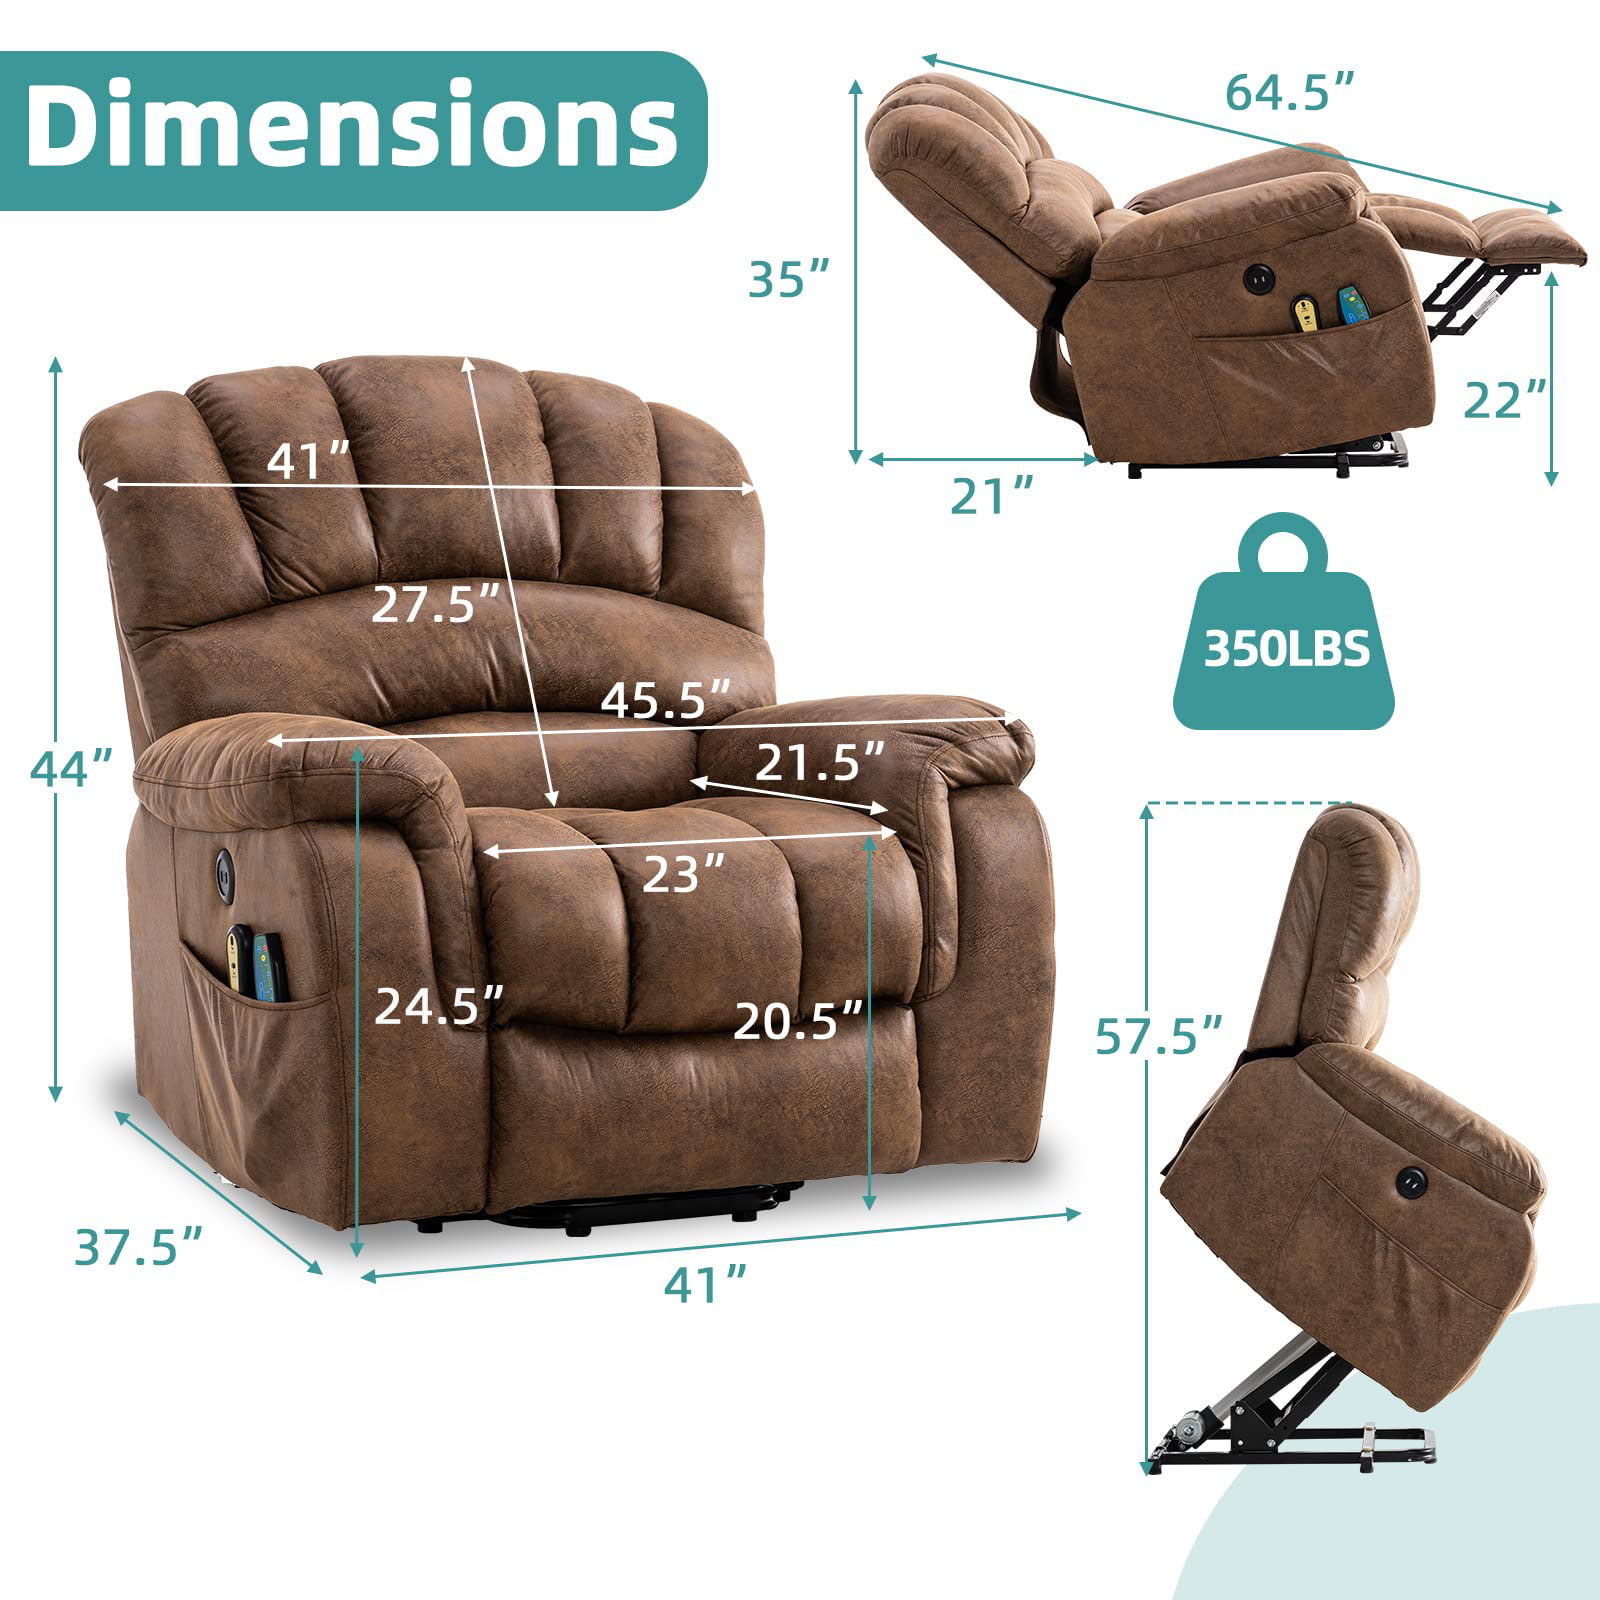 Buy MEETWARM Large Power Lift Electric Recliner Chair With Massage And Heat Overstuffed Wide